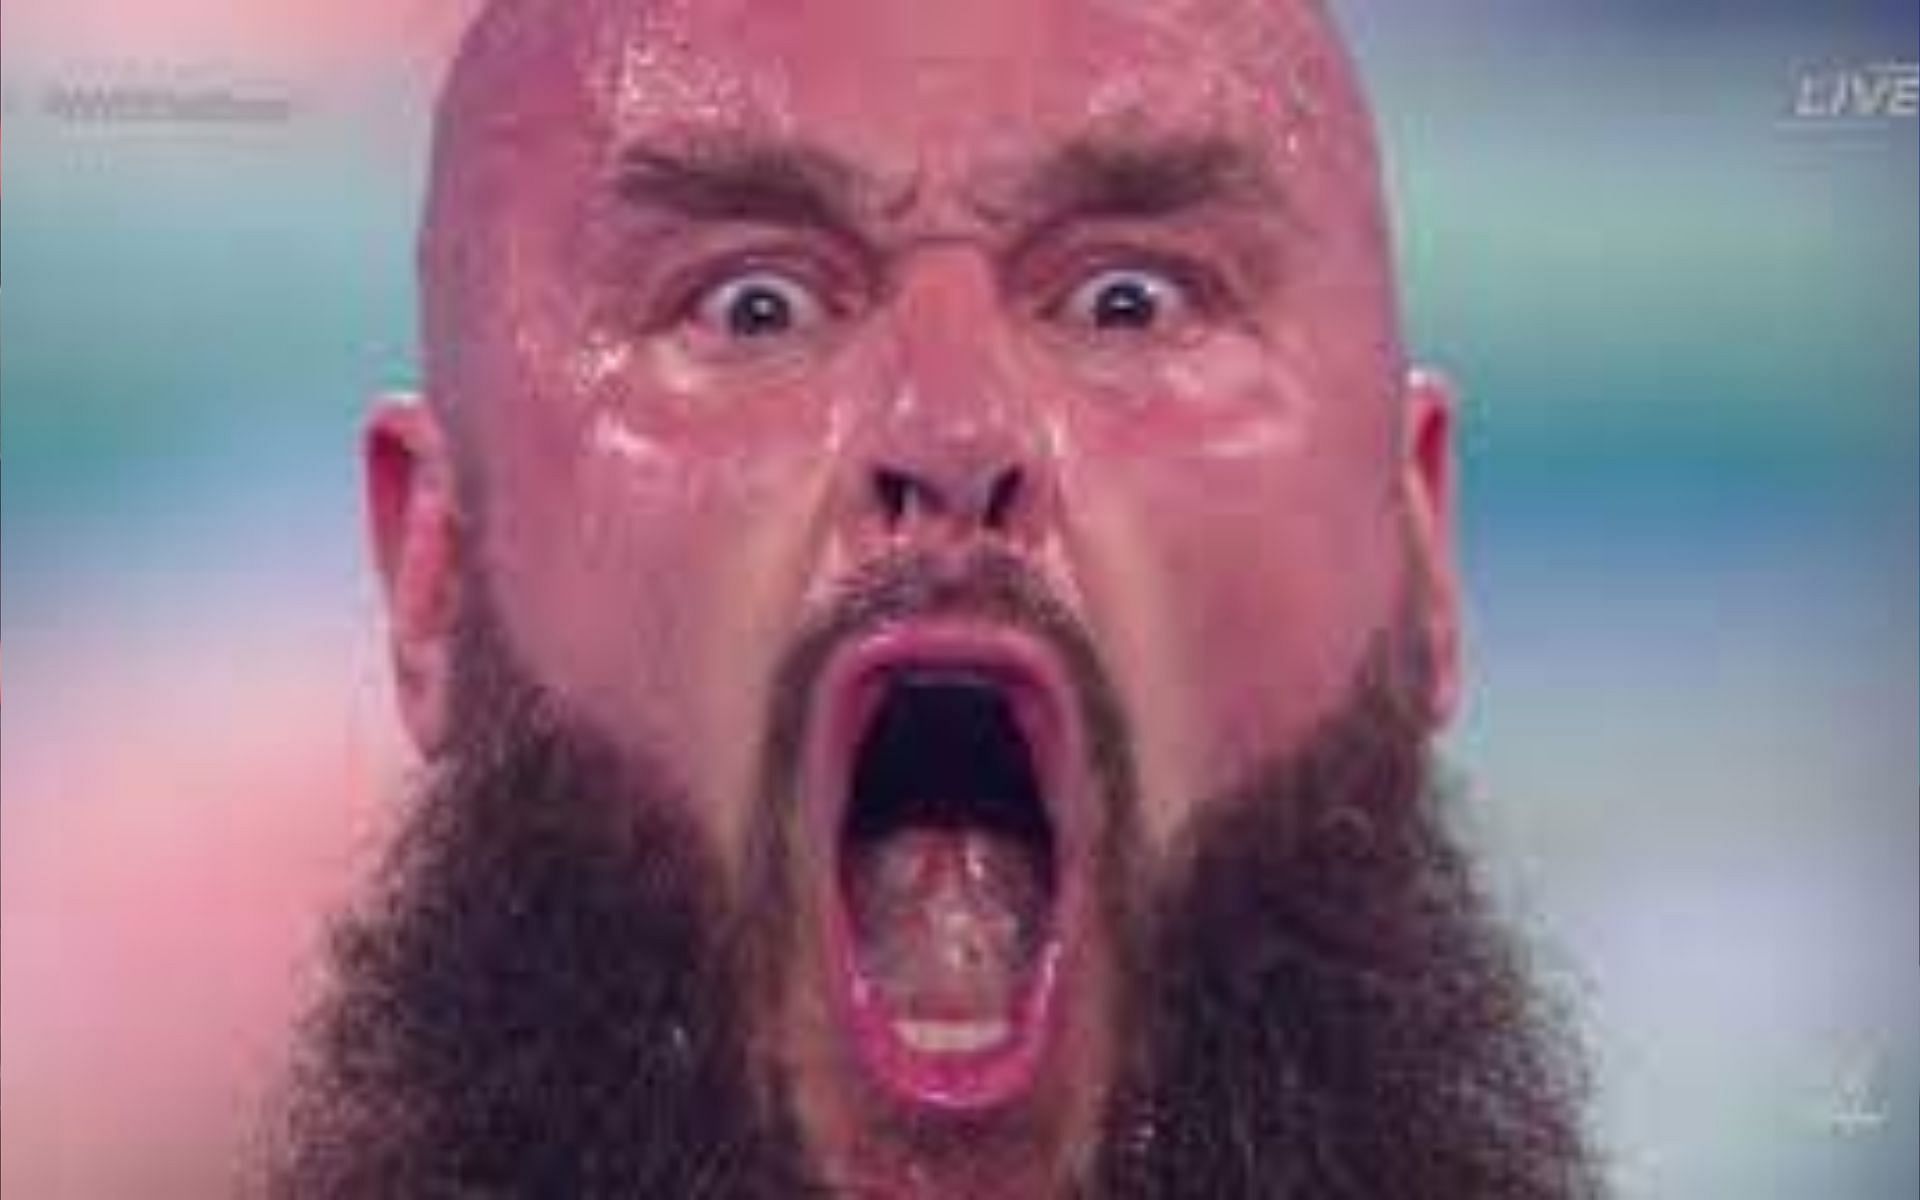 Braun Strowman is set for a match at WWE Crown Jewel 2022